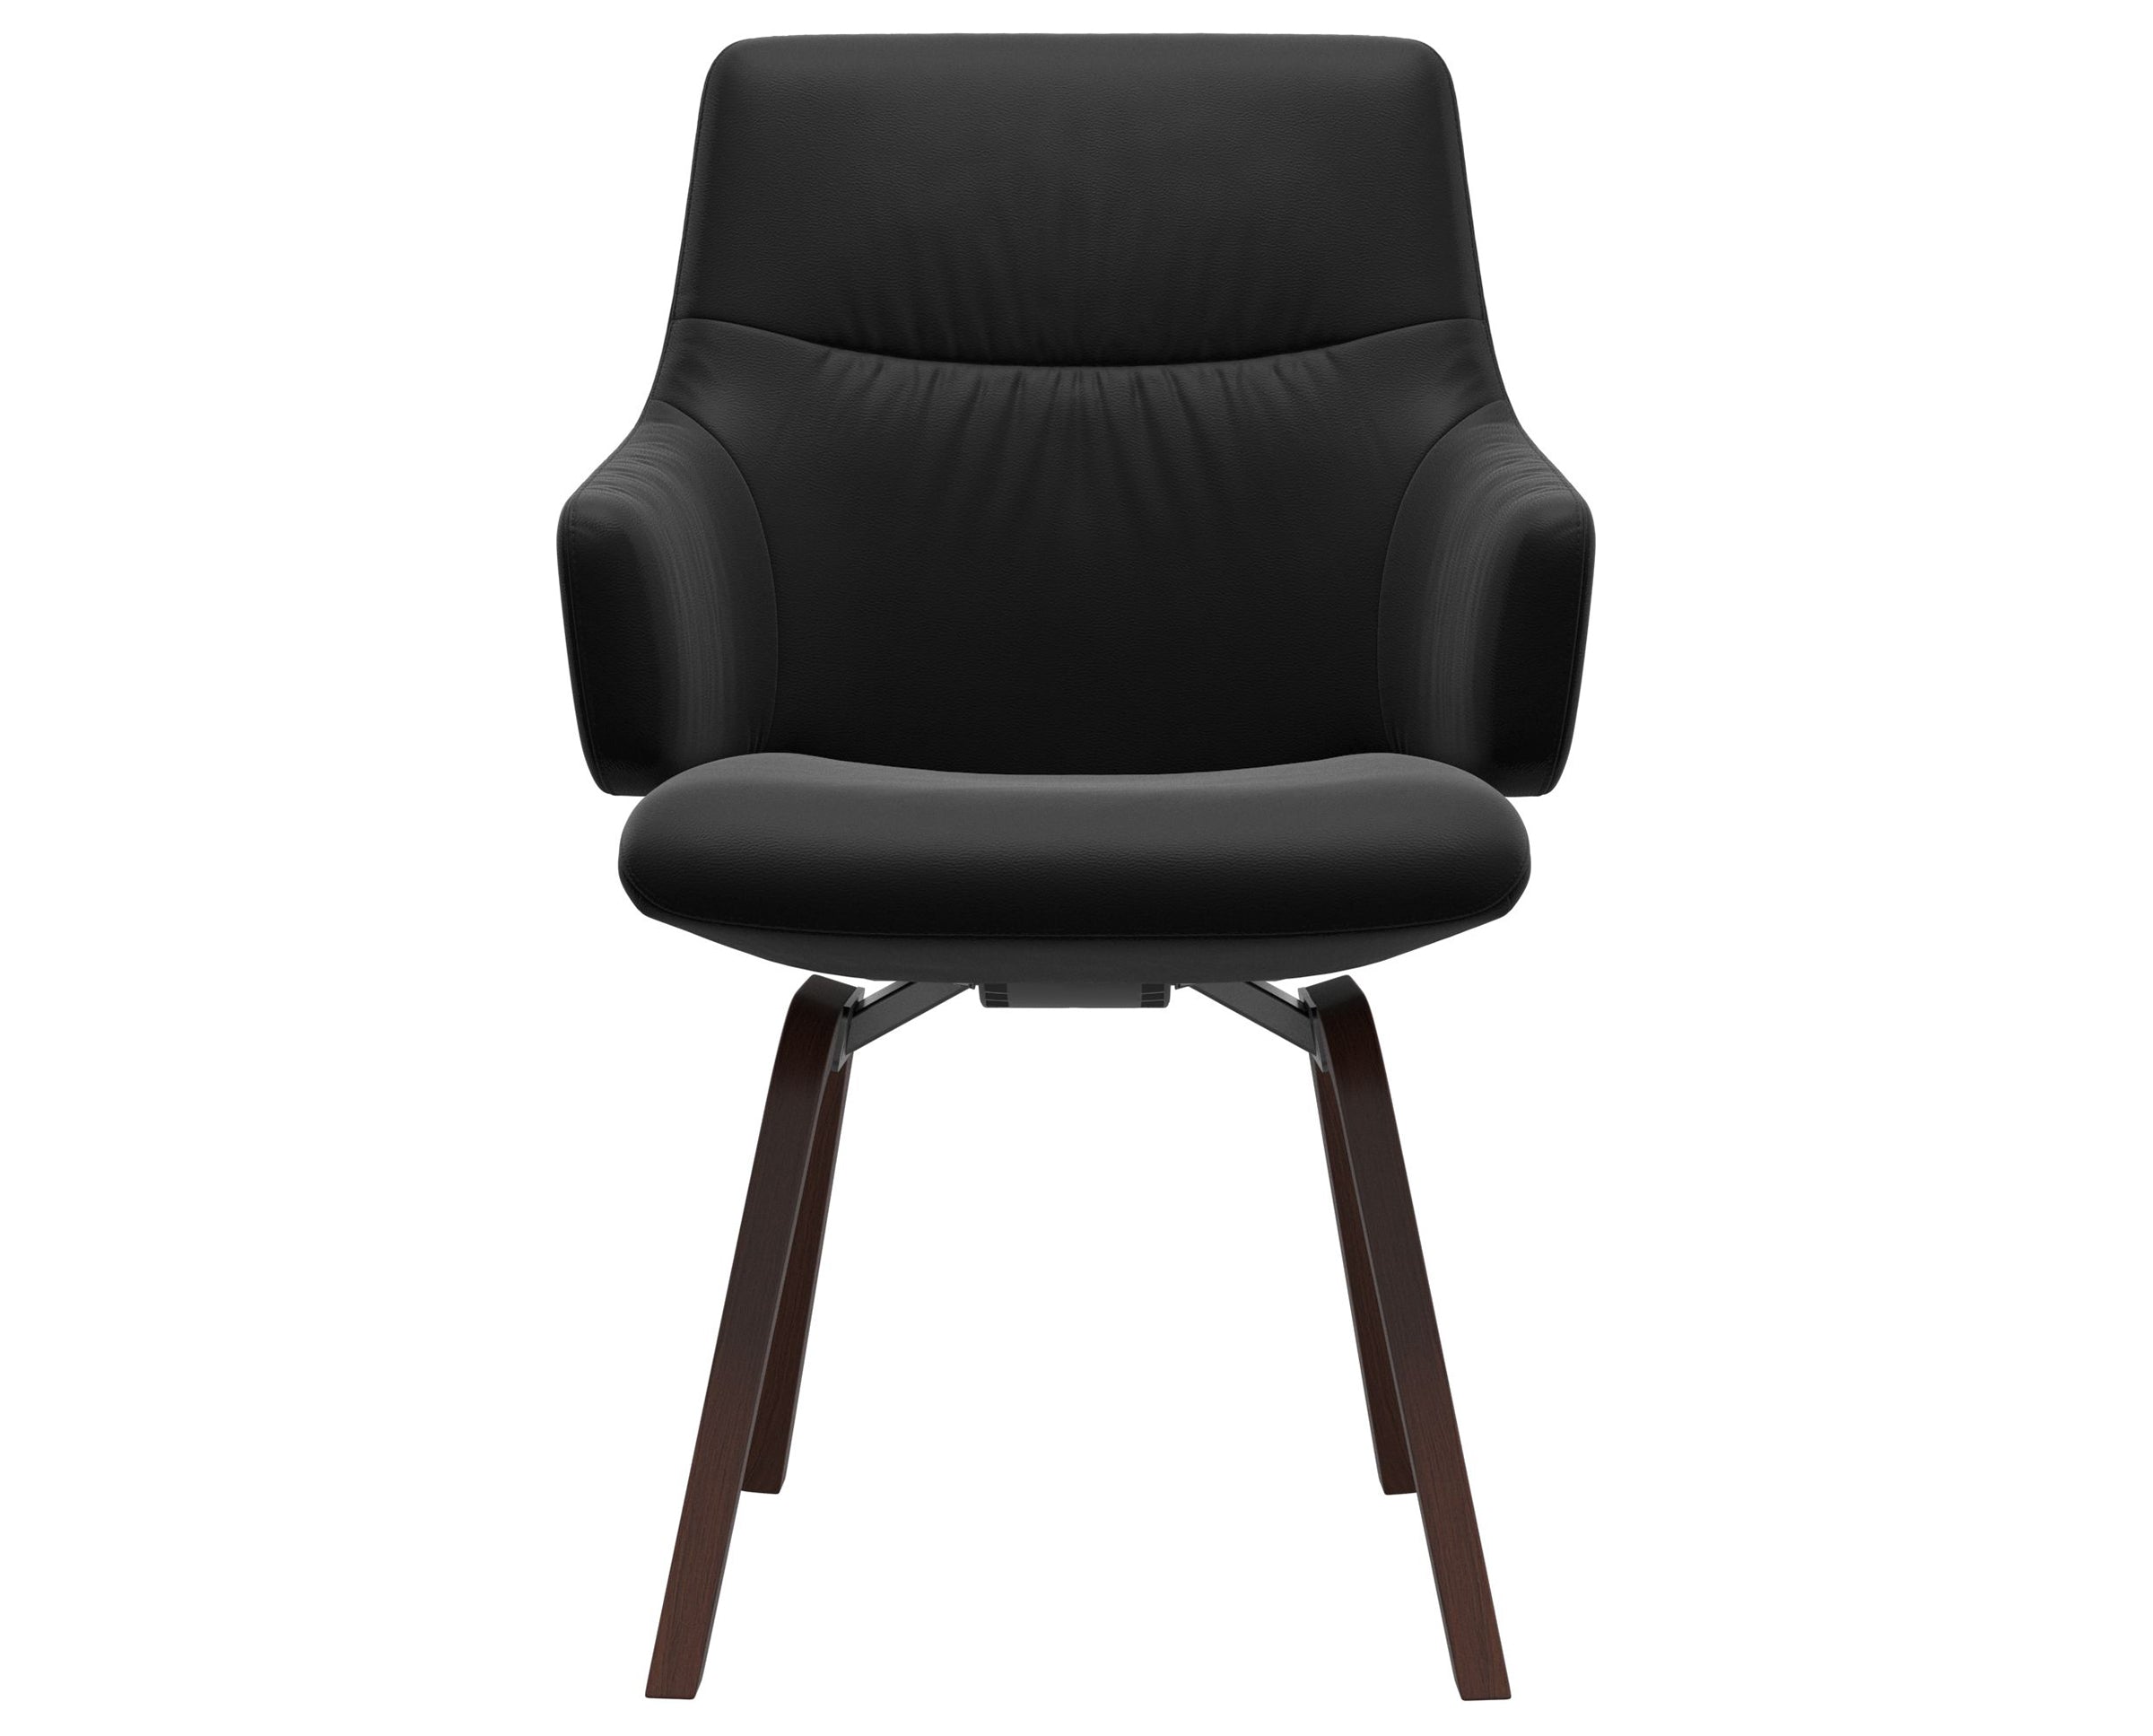 Paloma Leather Black and Walnut Base | Stressless Mint Low Back D200 Dining Chair w/Arms | Valley Ridge Furniture